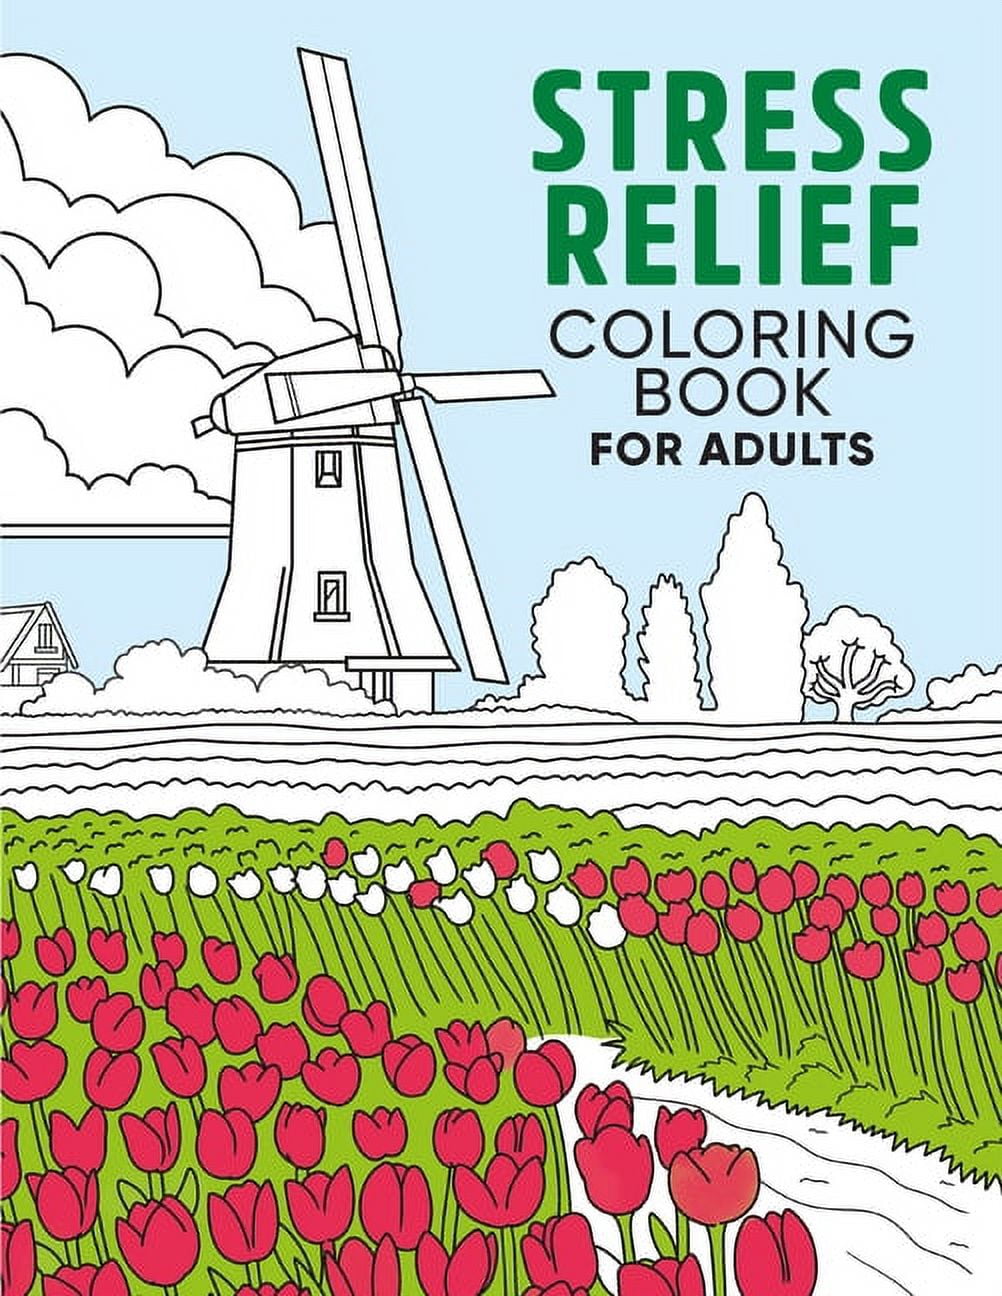 Nature Stress Relieving Coloring Book for Adults & Colored Pencils Set